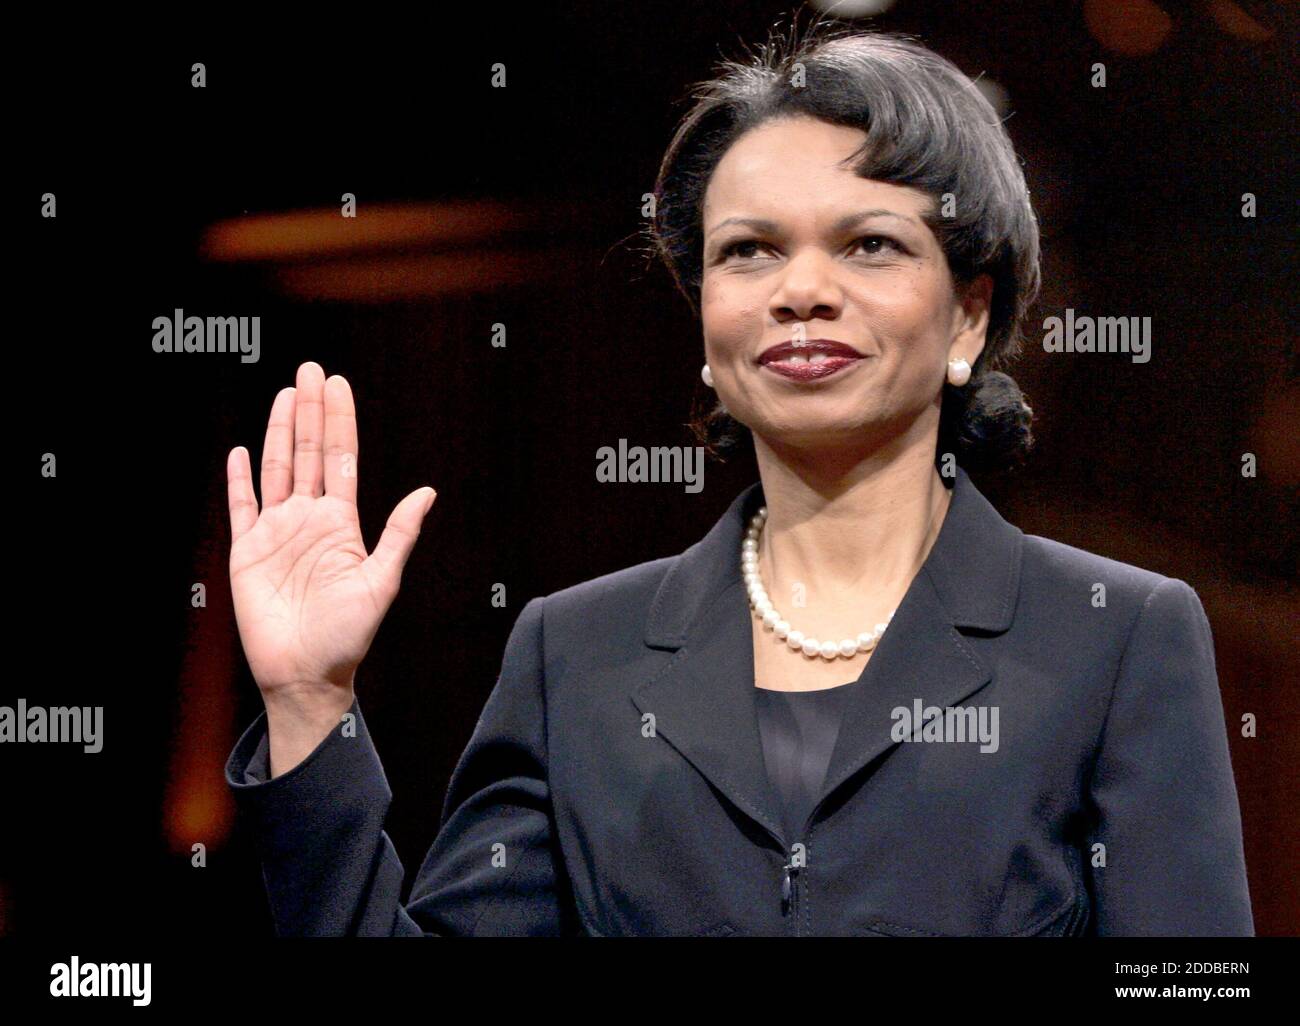 NO FILM, NO VIDEO, NO TV, NO DOCUMENTARY - Condoleezza Rice is sworn in before the Senate Foreign Relations Committee before her confirmation hearing at the Capitol in Washington DC, USA, on Tuesday, January 18, 2005, on her nomination by President George W. Bush to succeed Colin Powell as the Secretary of State. Photo by Chuck Kennedy/KRT/ABACA. Stock Photo